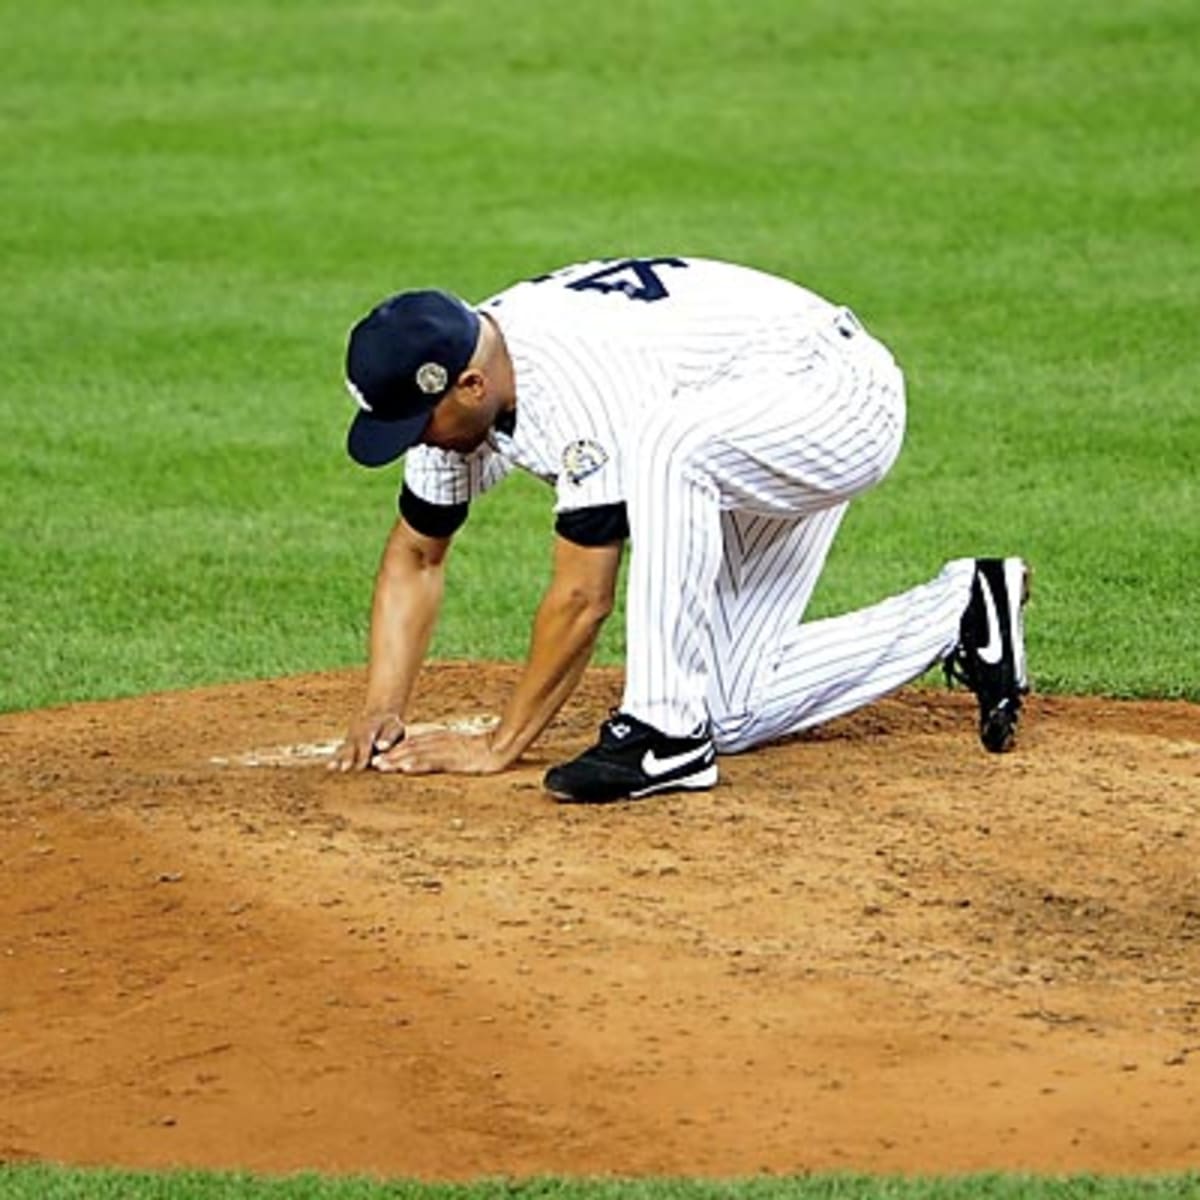 Mariano Rivera Cutter: The Mechanics of His Signature Pitch